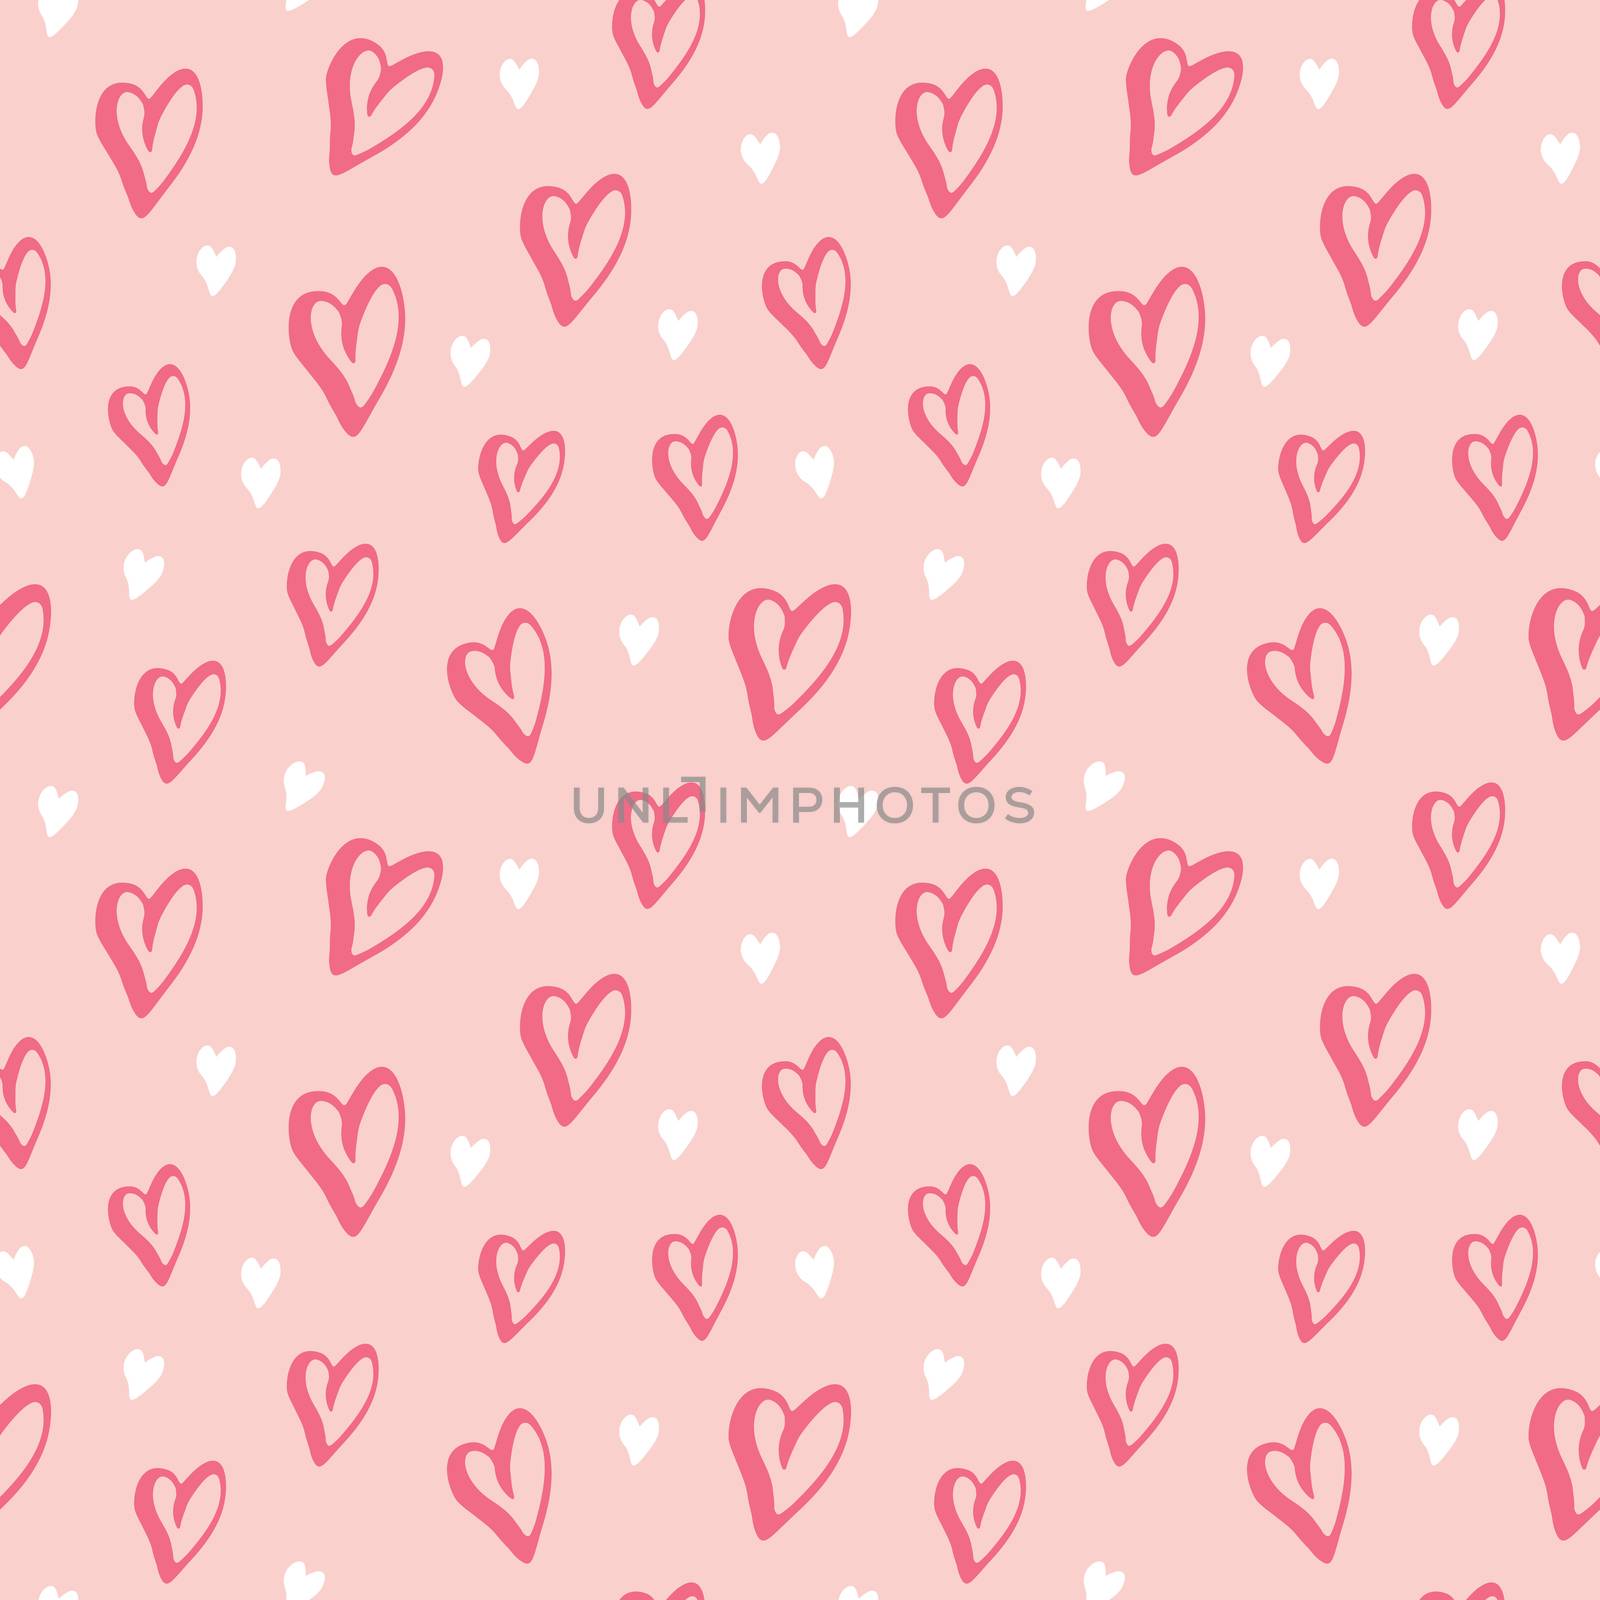 Heart symbol seamless pattern vector illustration. Hand drawn sketch doodle background. Saint Valentains Day or womens day background by Lemon_workshop